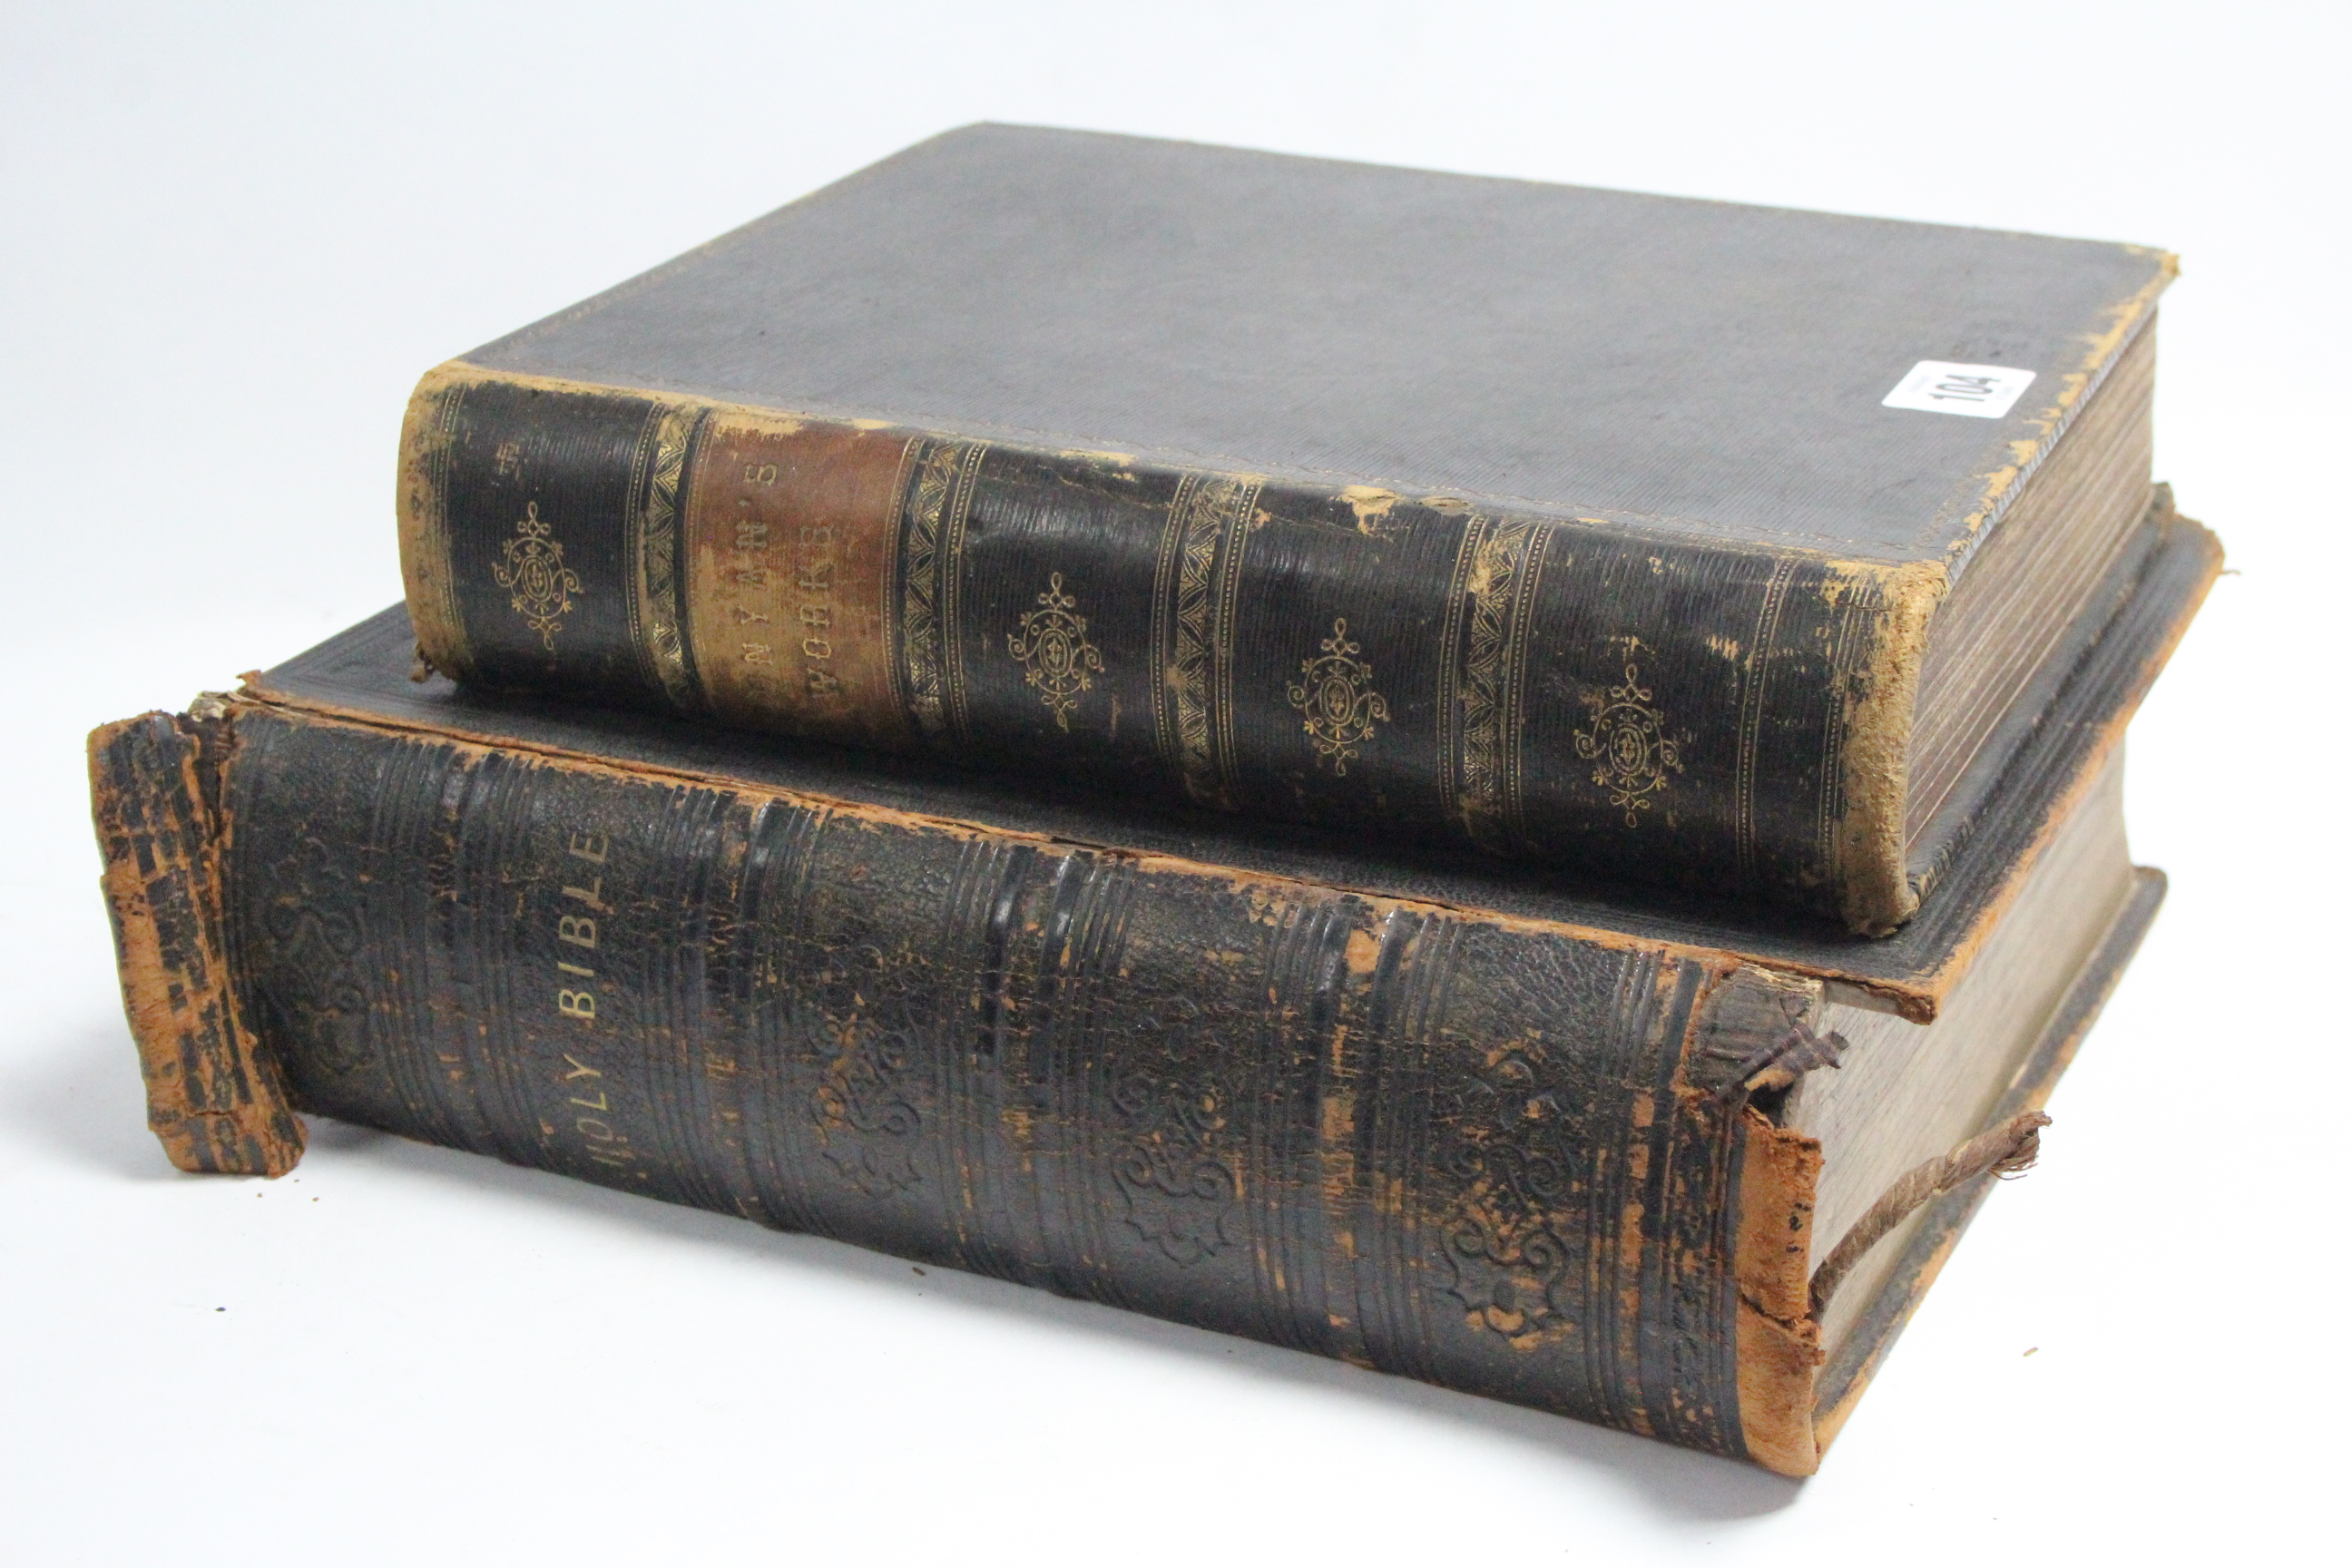 A mid-19th century Holy Bible printed by Eyre & Spottiswoode; & a leather-bound volume “The